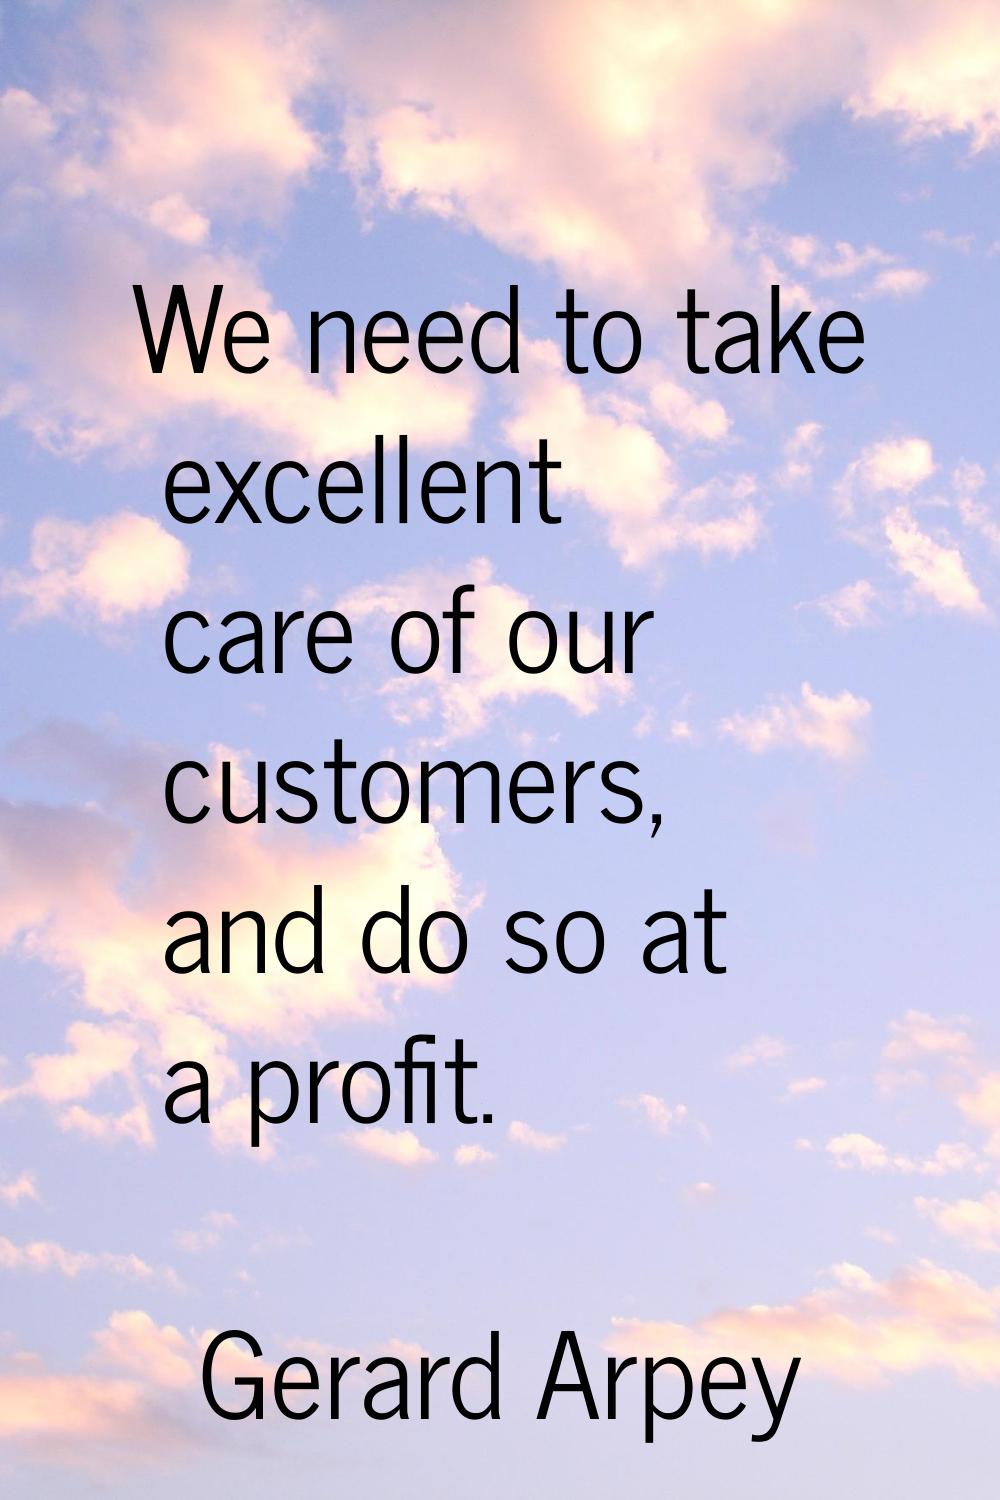 We need to take excellent care of our customers, and do so at a profit.